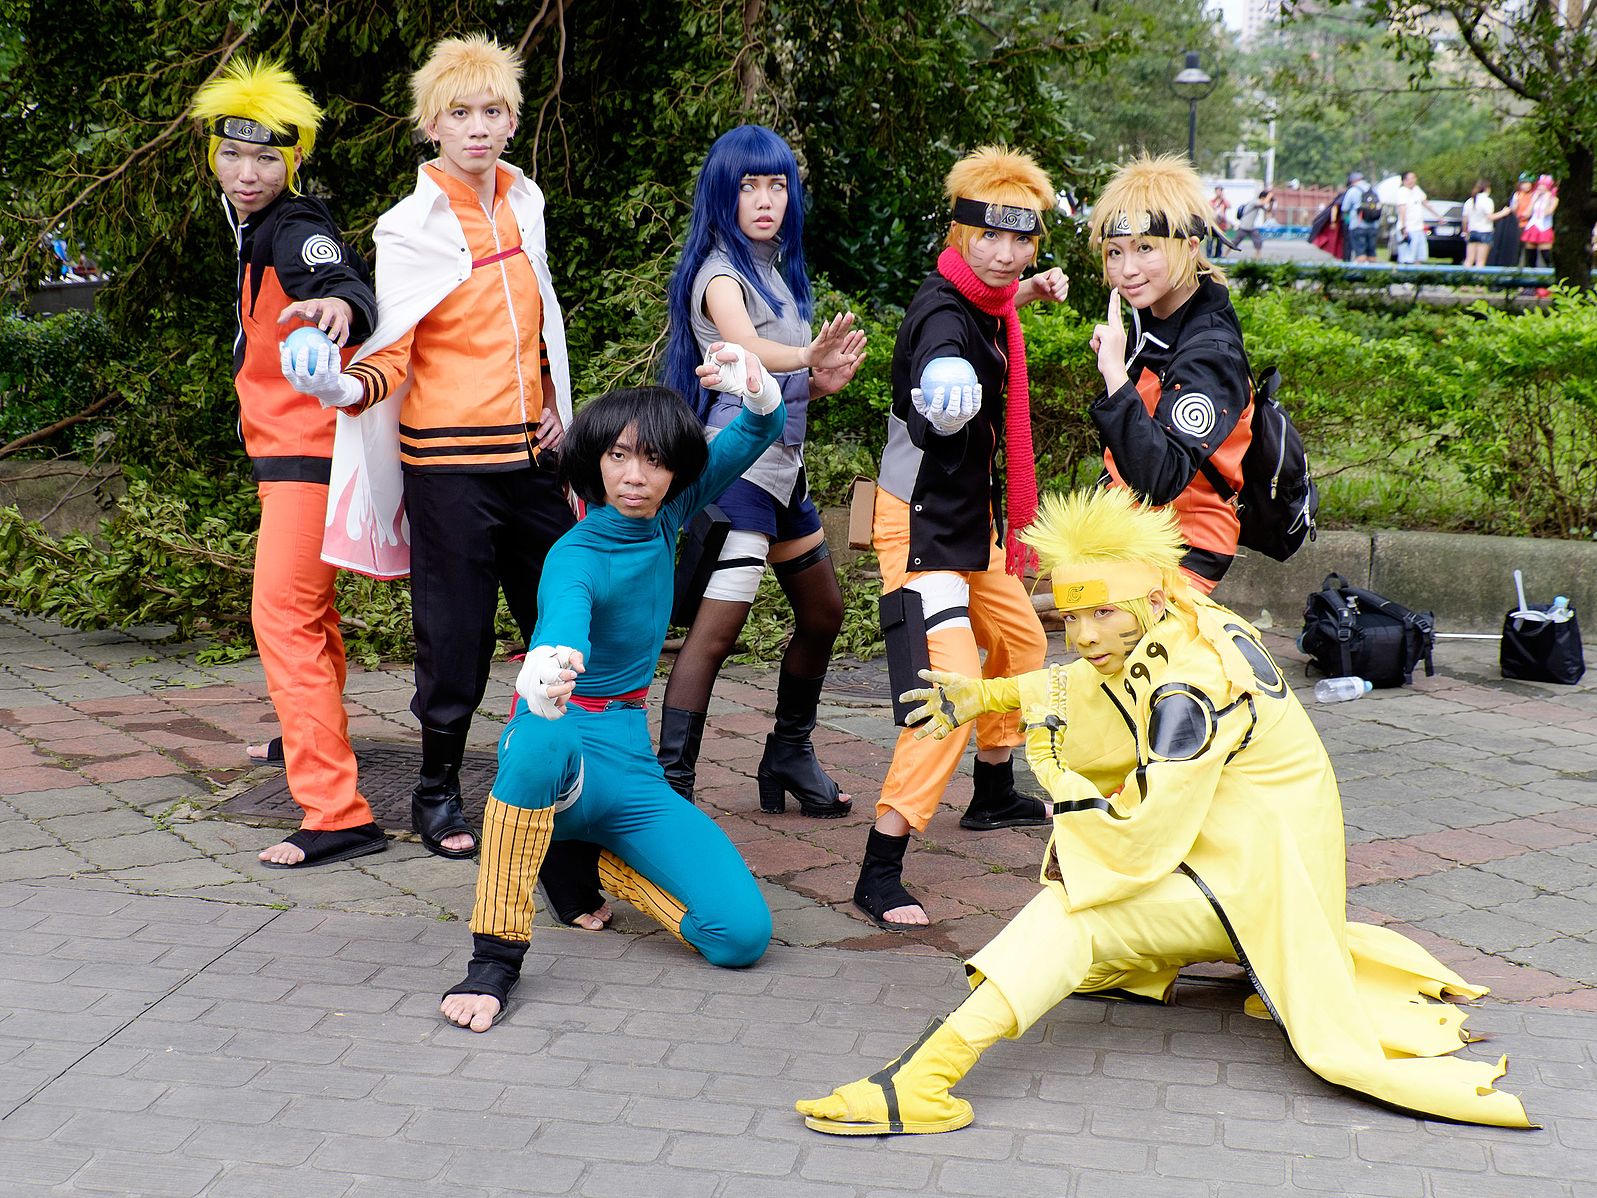 Group Portrait of Naruto Cosplayers at CWT40